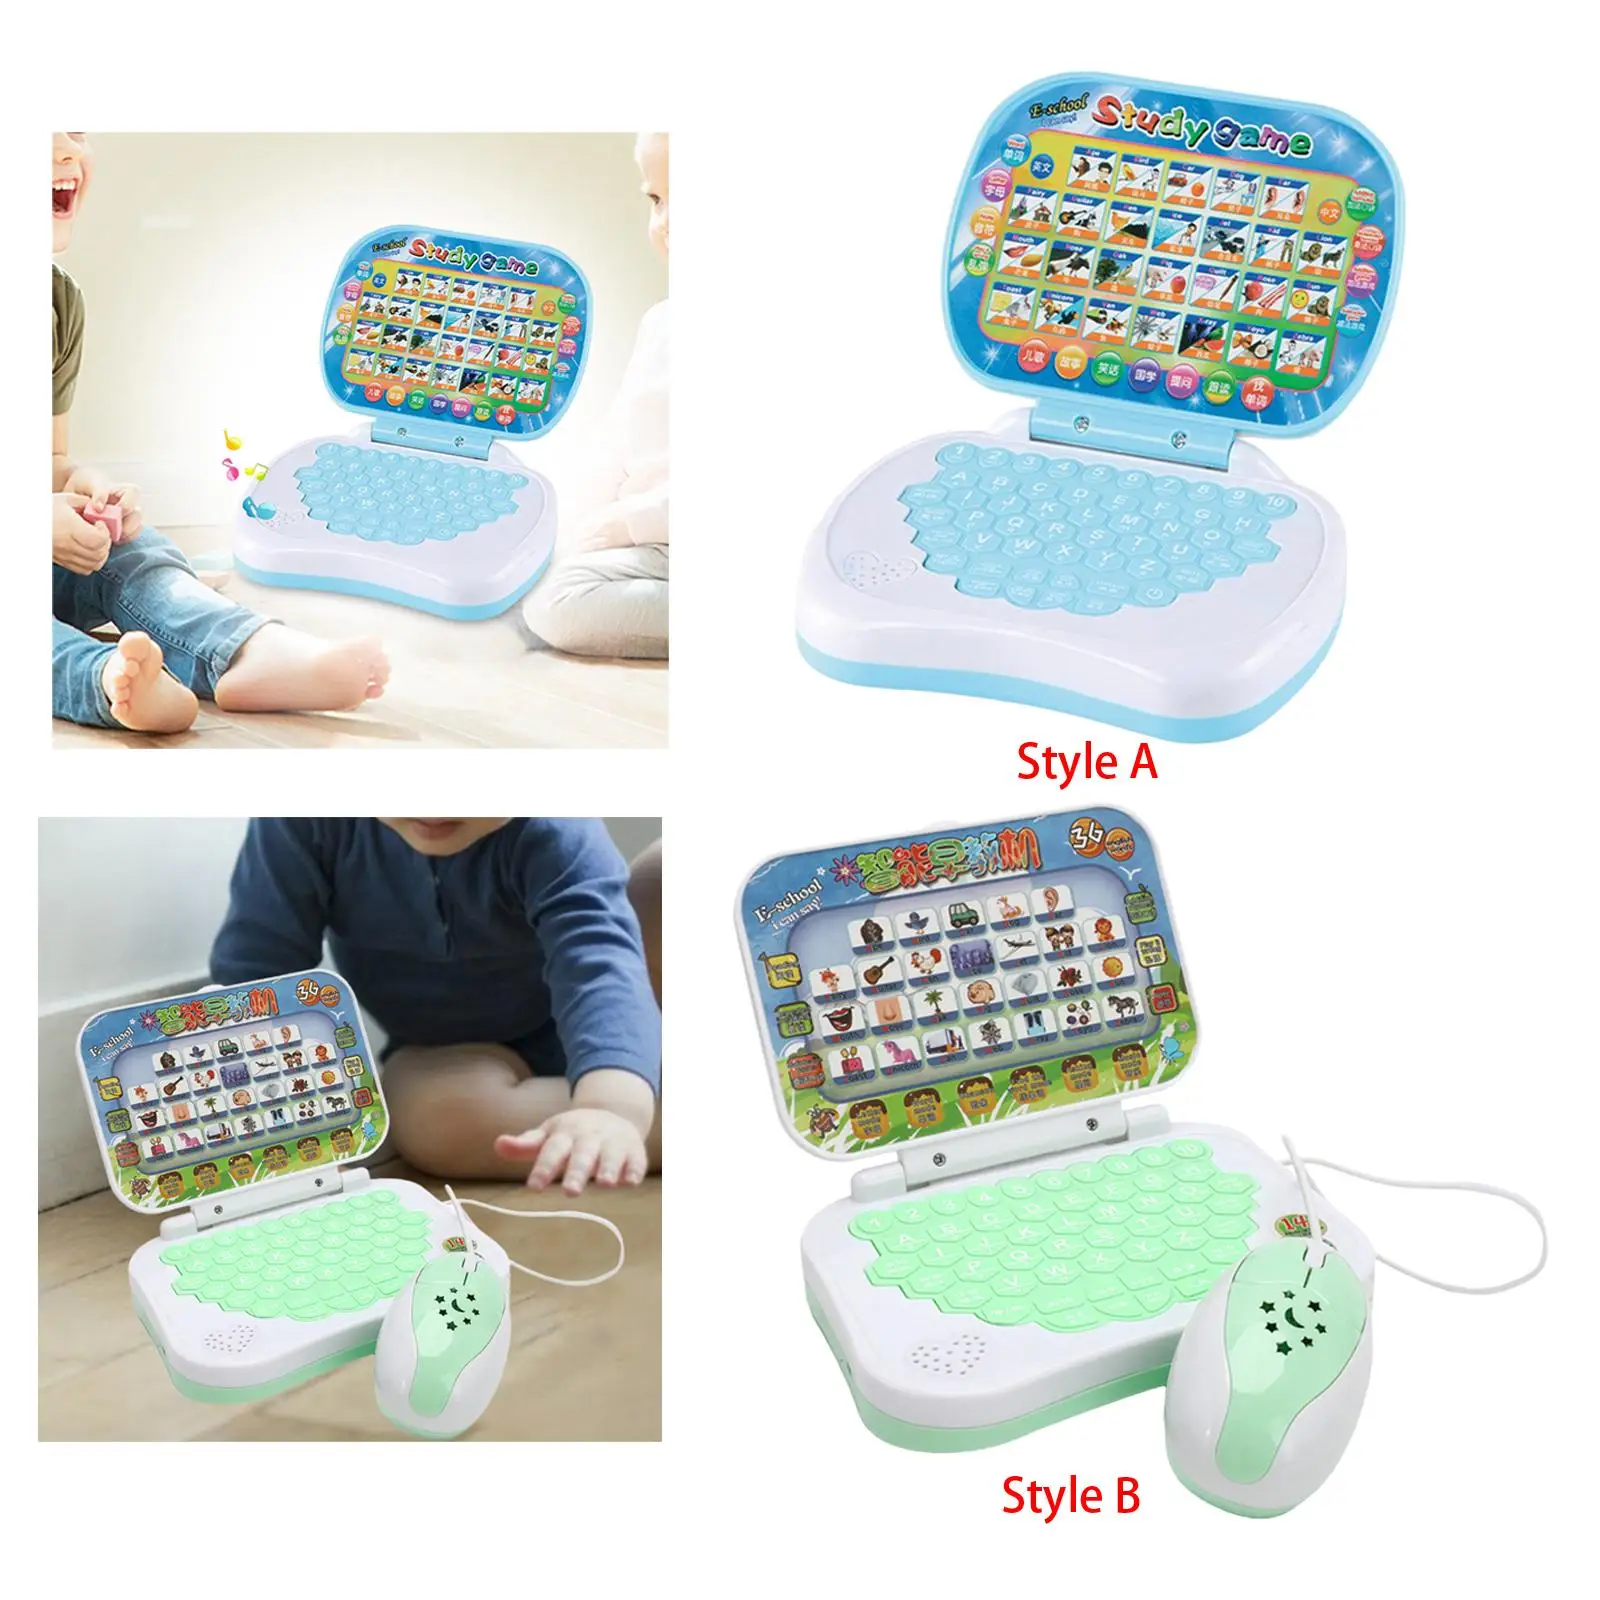 Handheld Language Learning Machine Early Education Child Interactive Learning Pad Tablet for Children Bithday Gifts